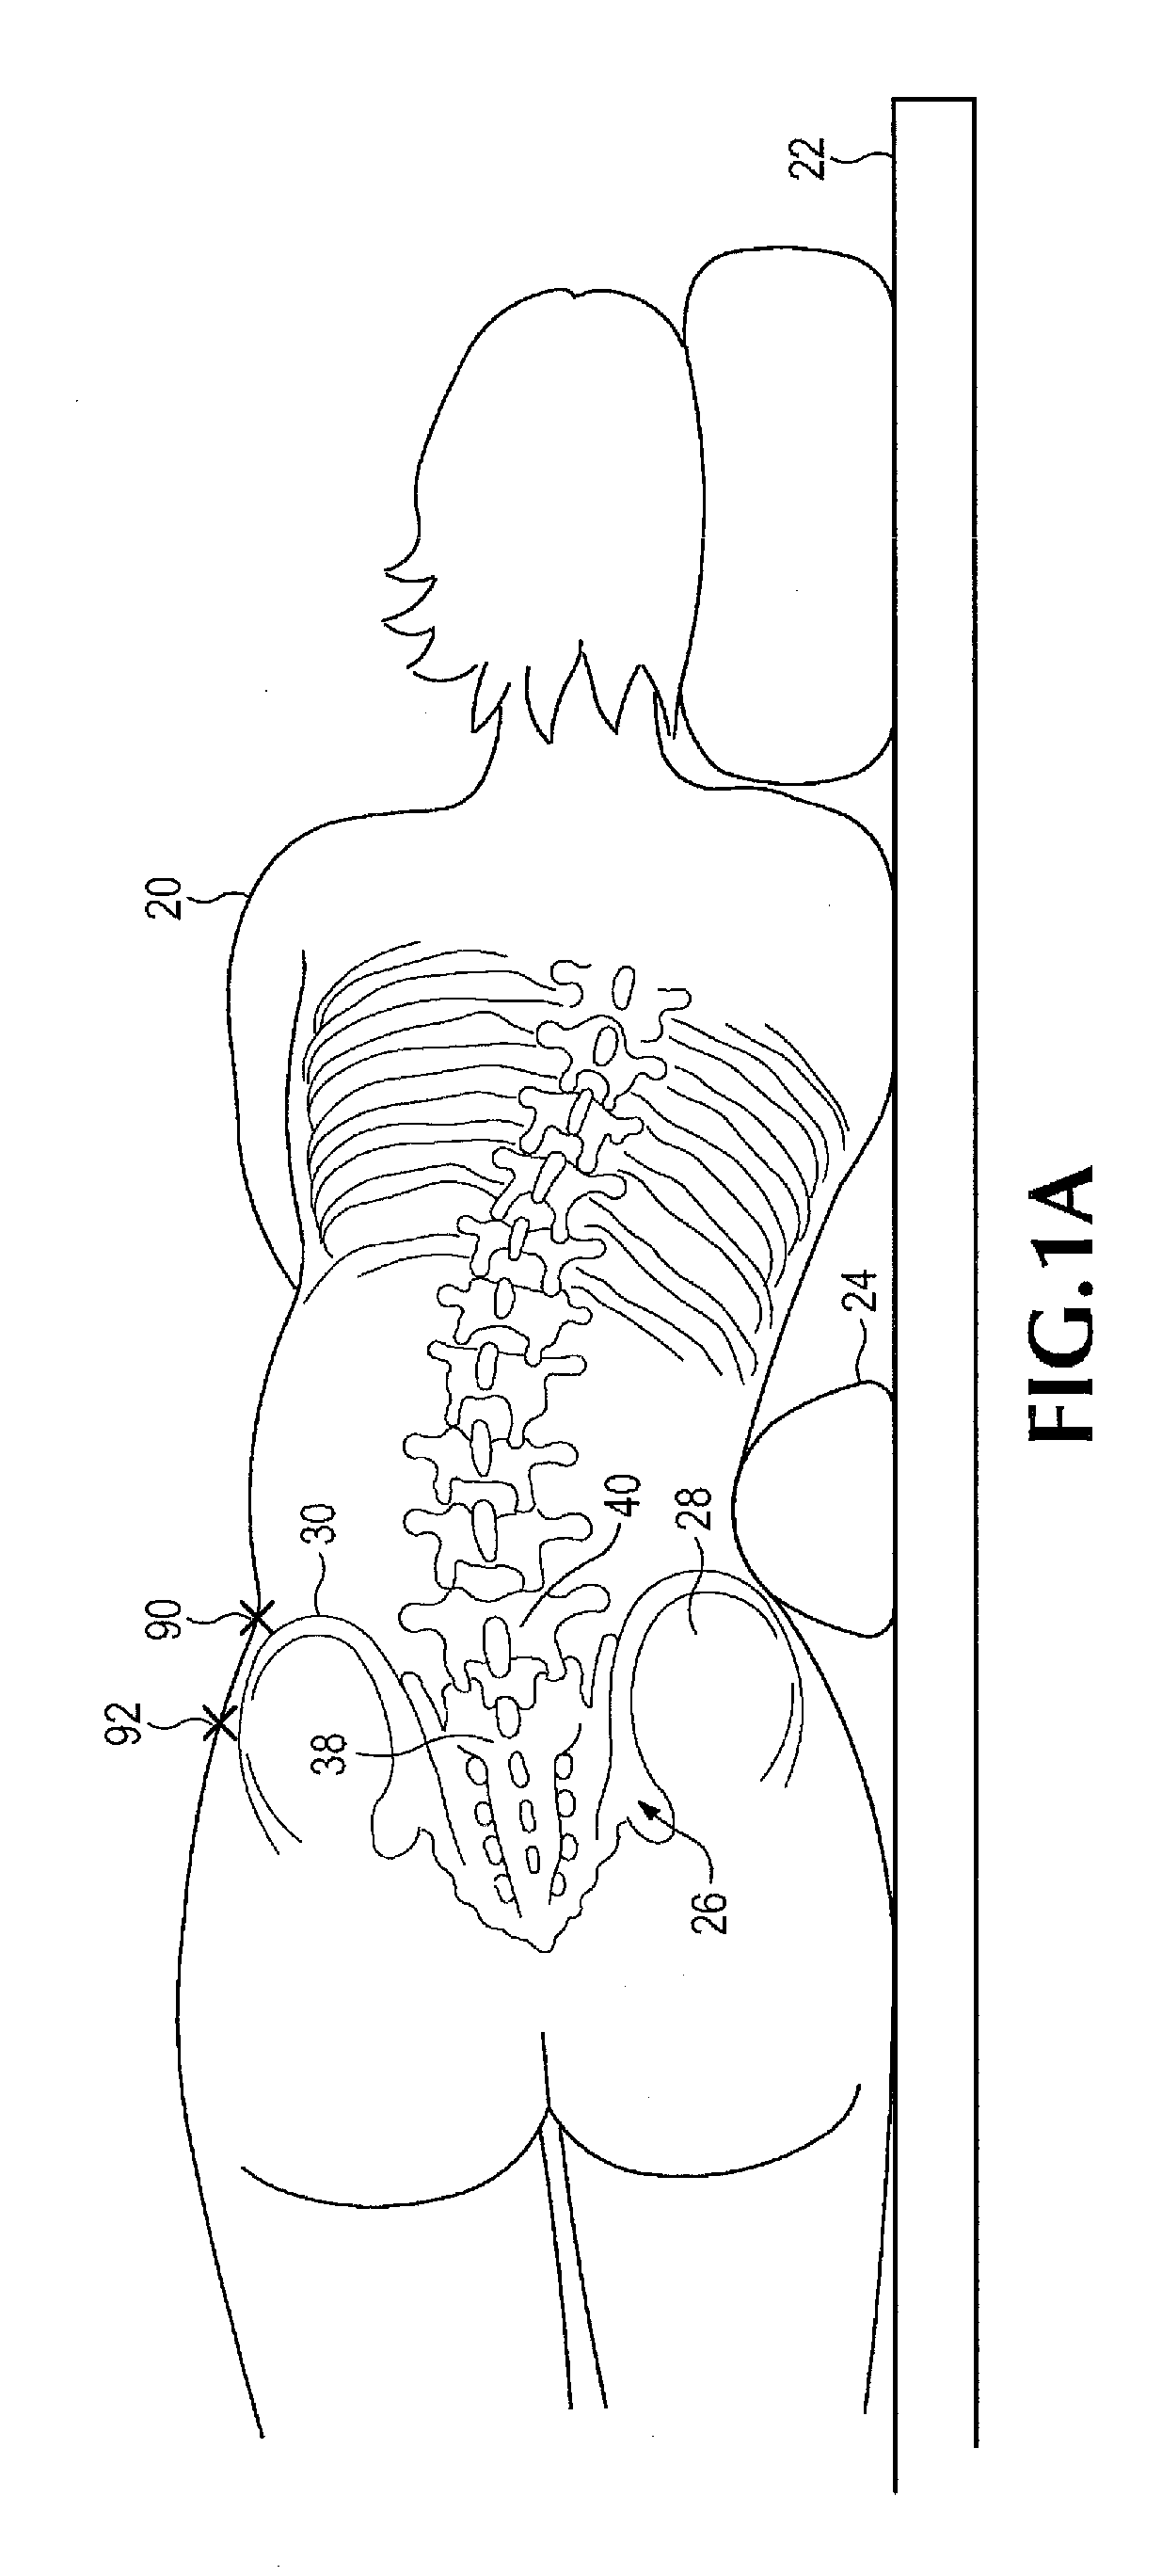 Insertion device for use during retroperitoneal lateral insertion of spinal implants